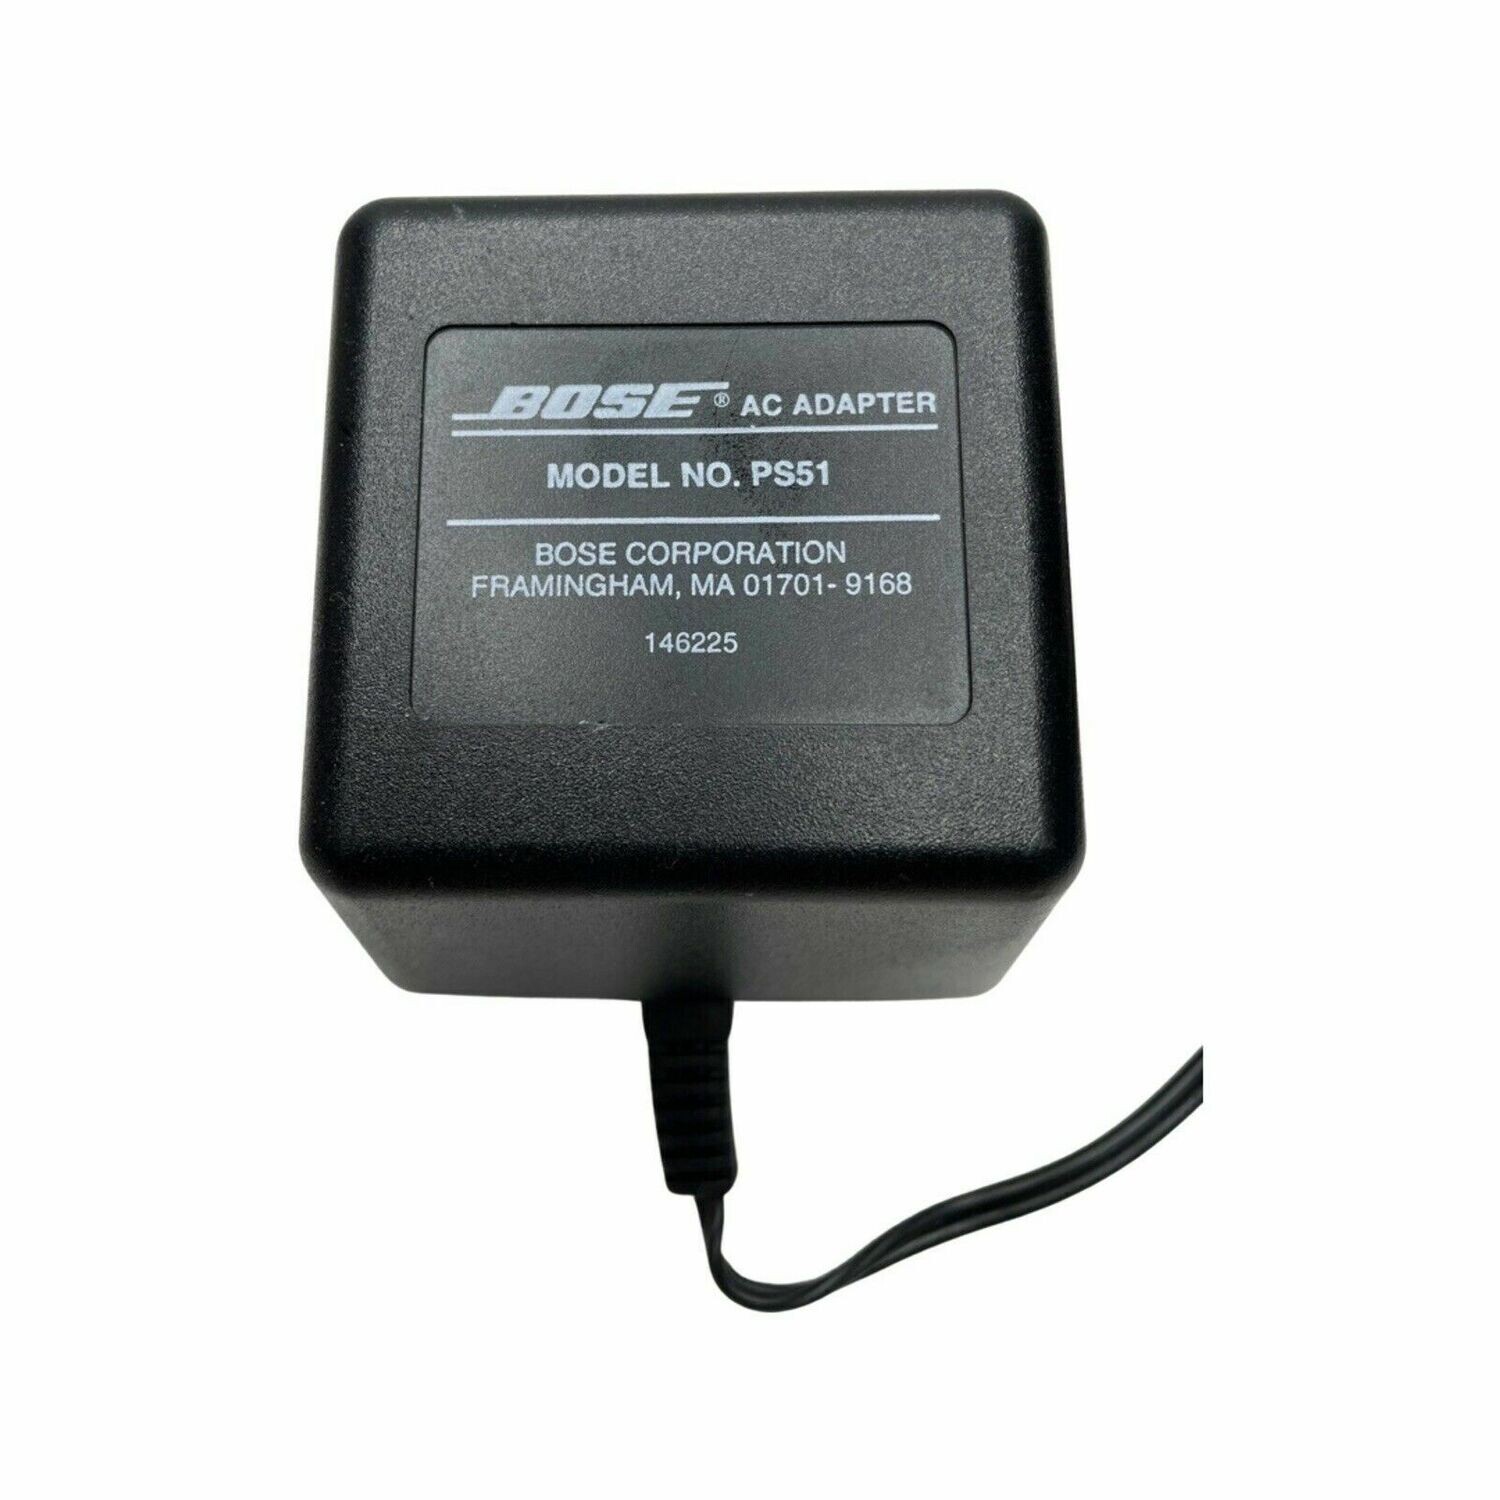 Bose PS51 AC Adapter Lifestyle 5, 3, 8, 12 MUSIC SYSTEM CD PLAYER Power Supply